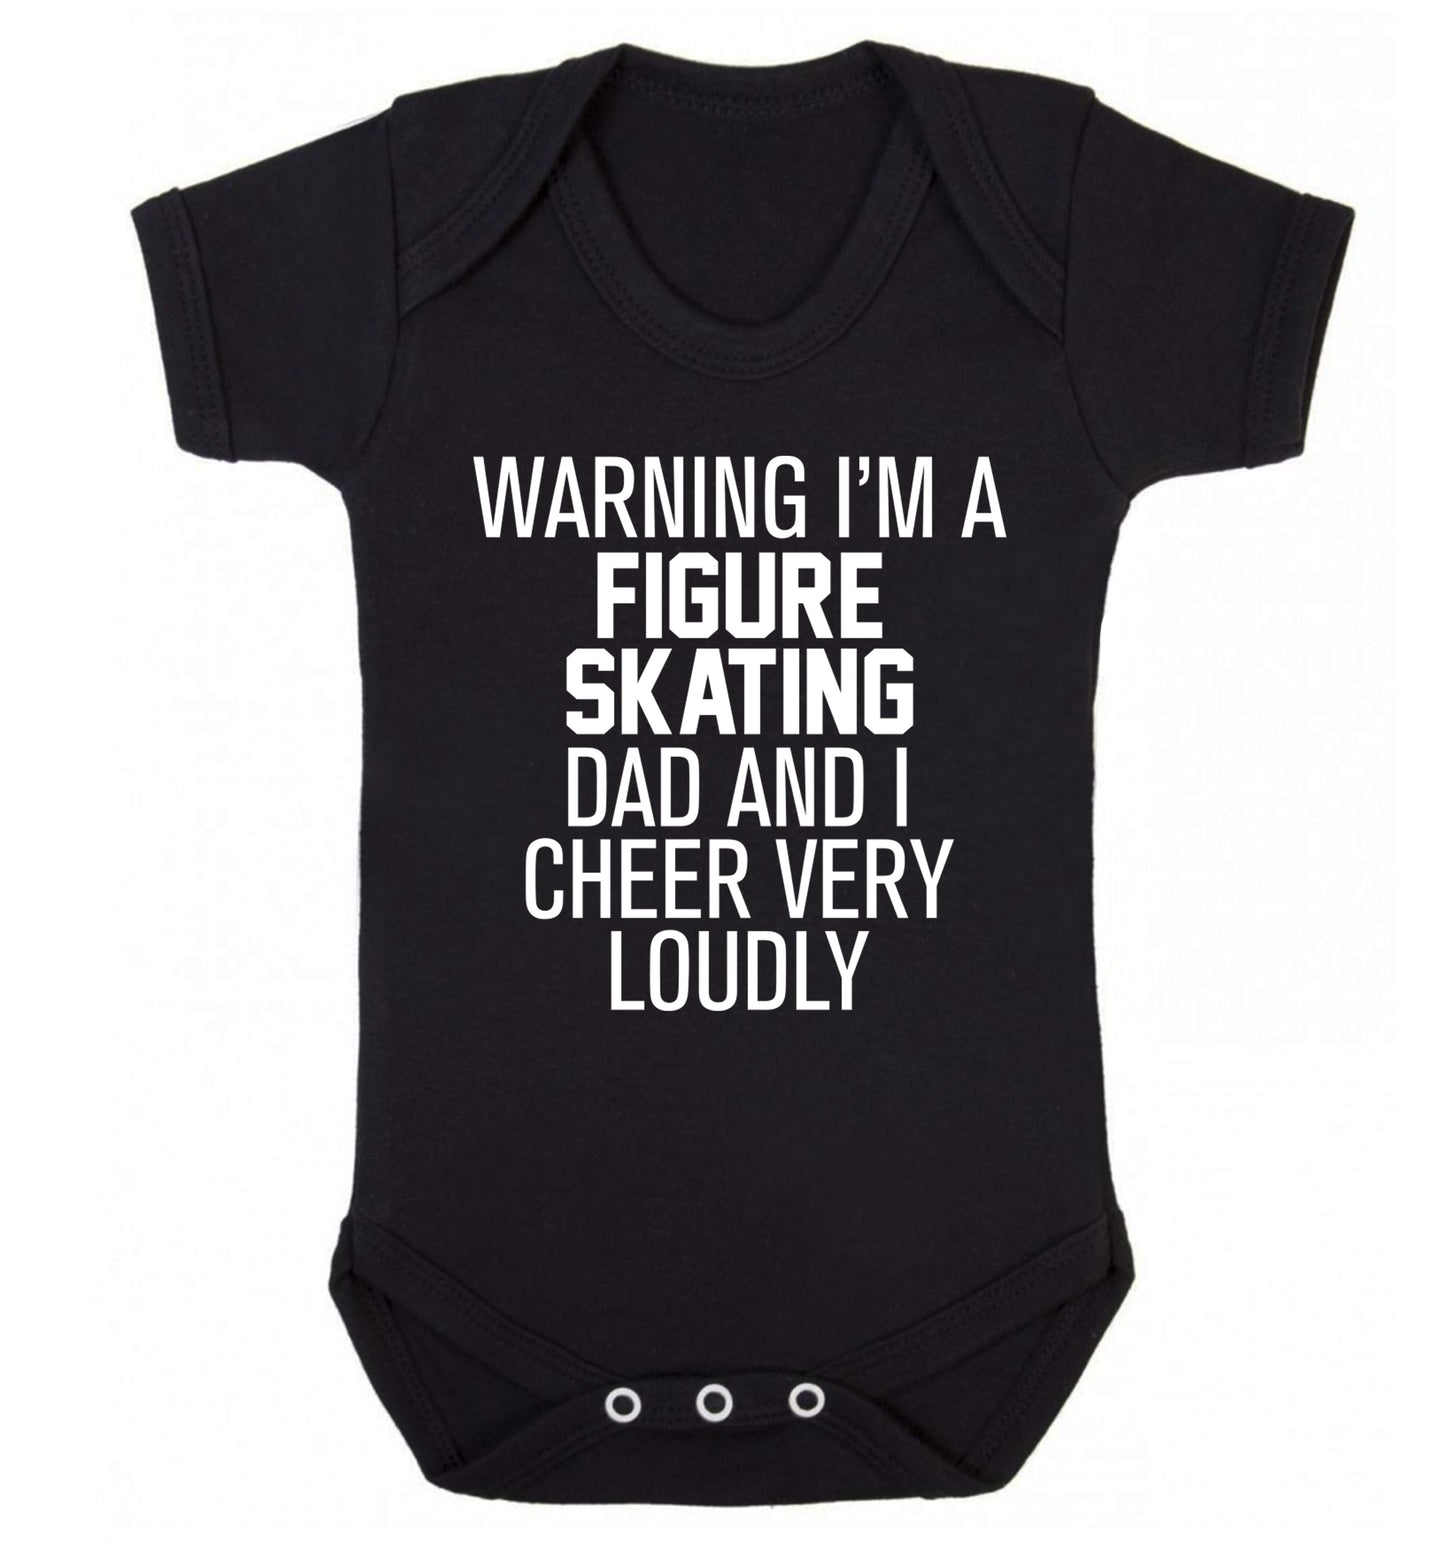 Warning I'm a figure skating dad and I cheer very loudly Baby Vest black 18-24 months